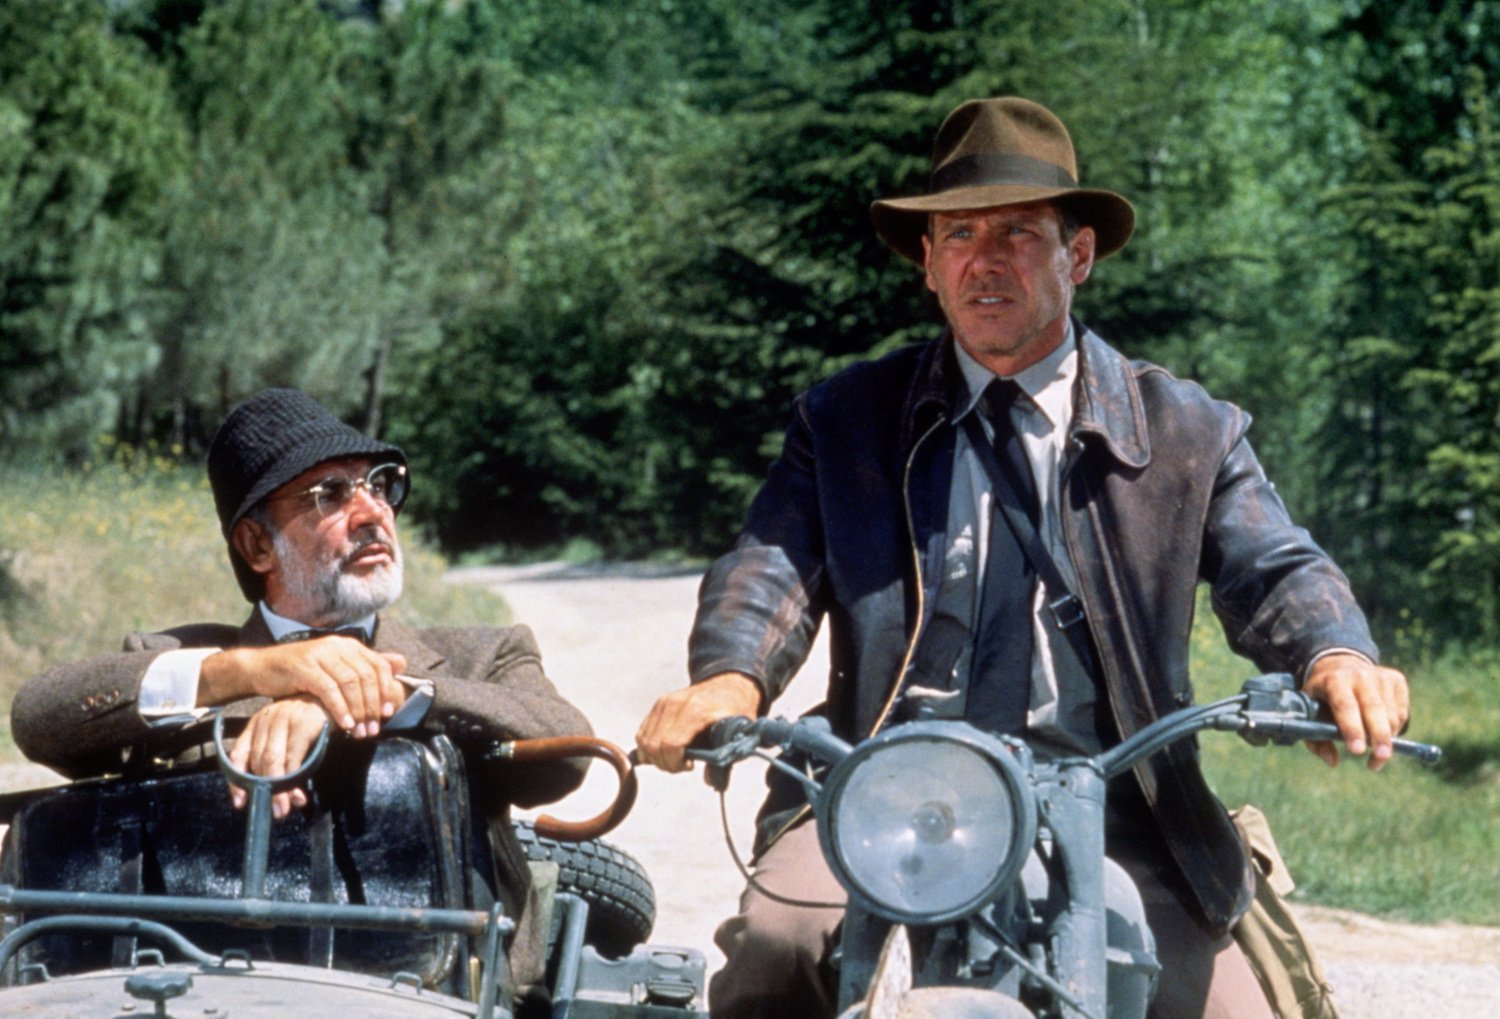 Sean Connery in sidecar and Harrison Ford on a motorcycle